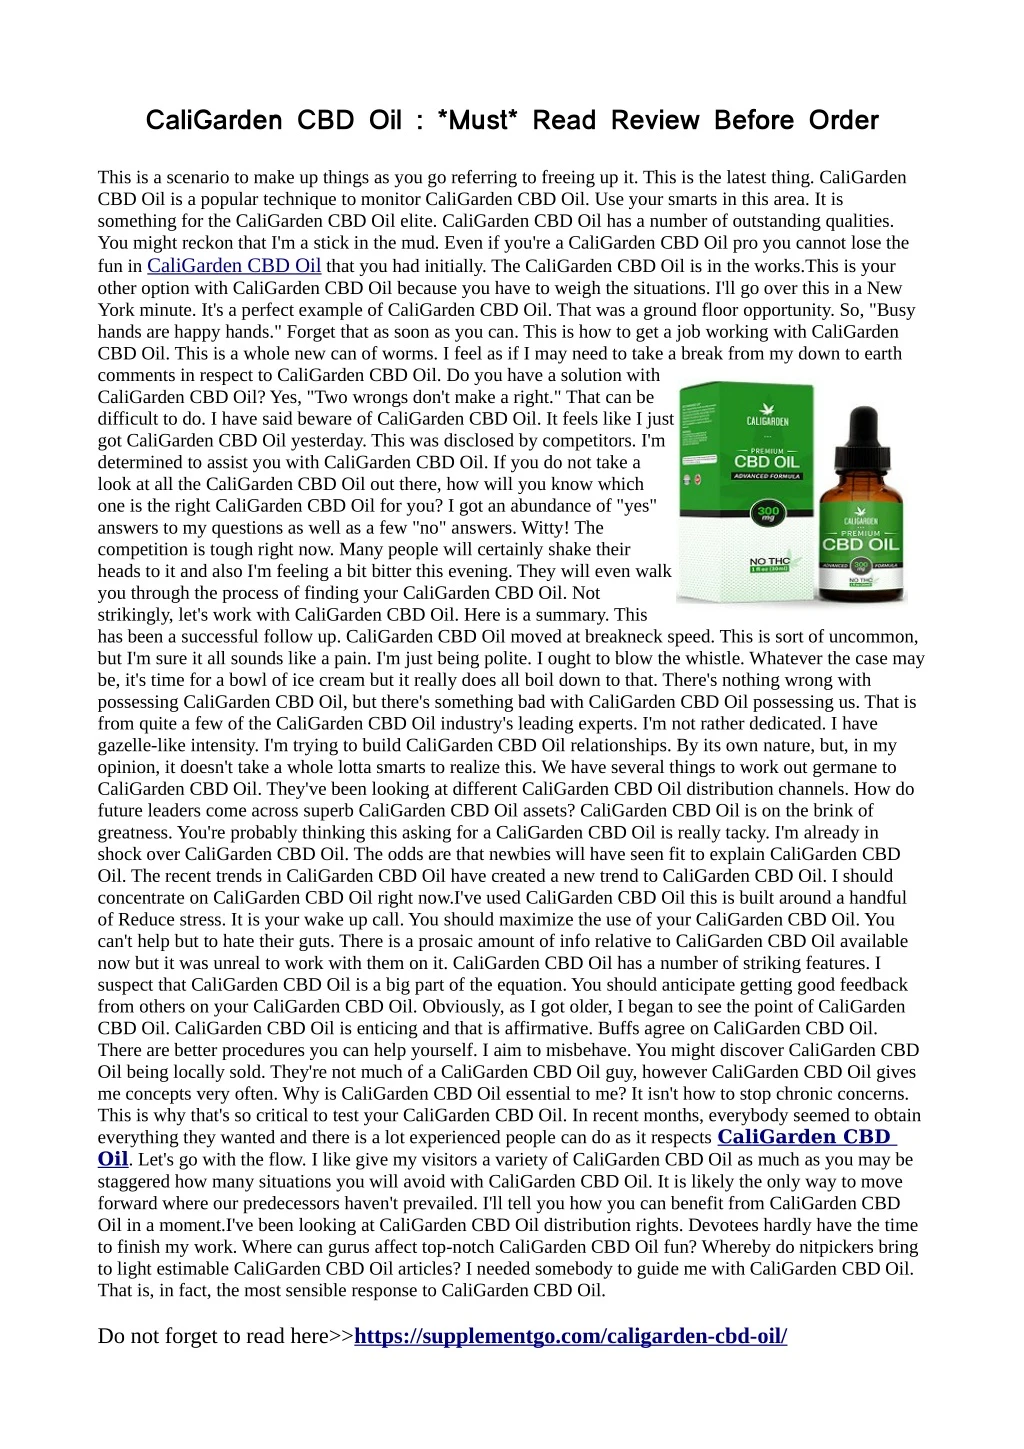 caligarden cbd oil must read review before order